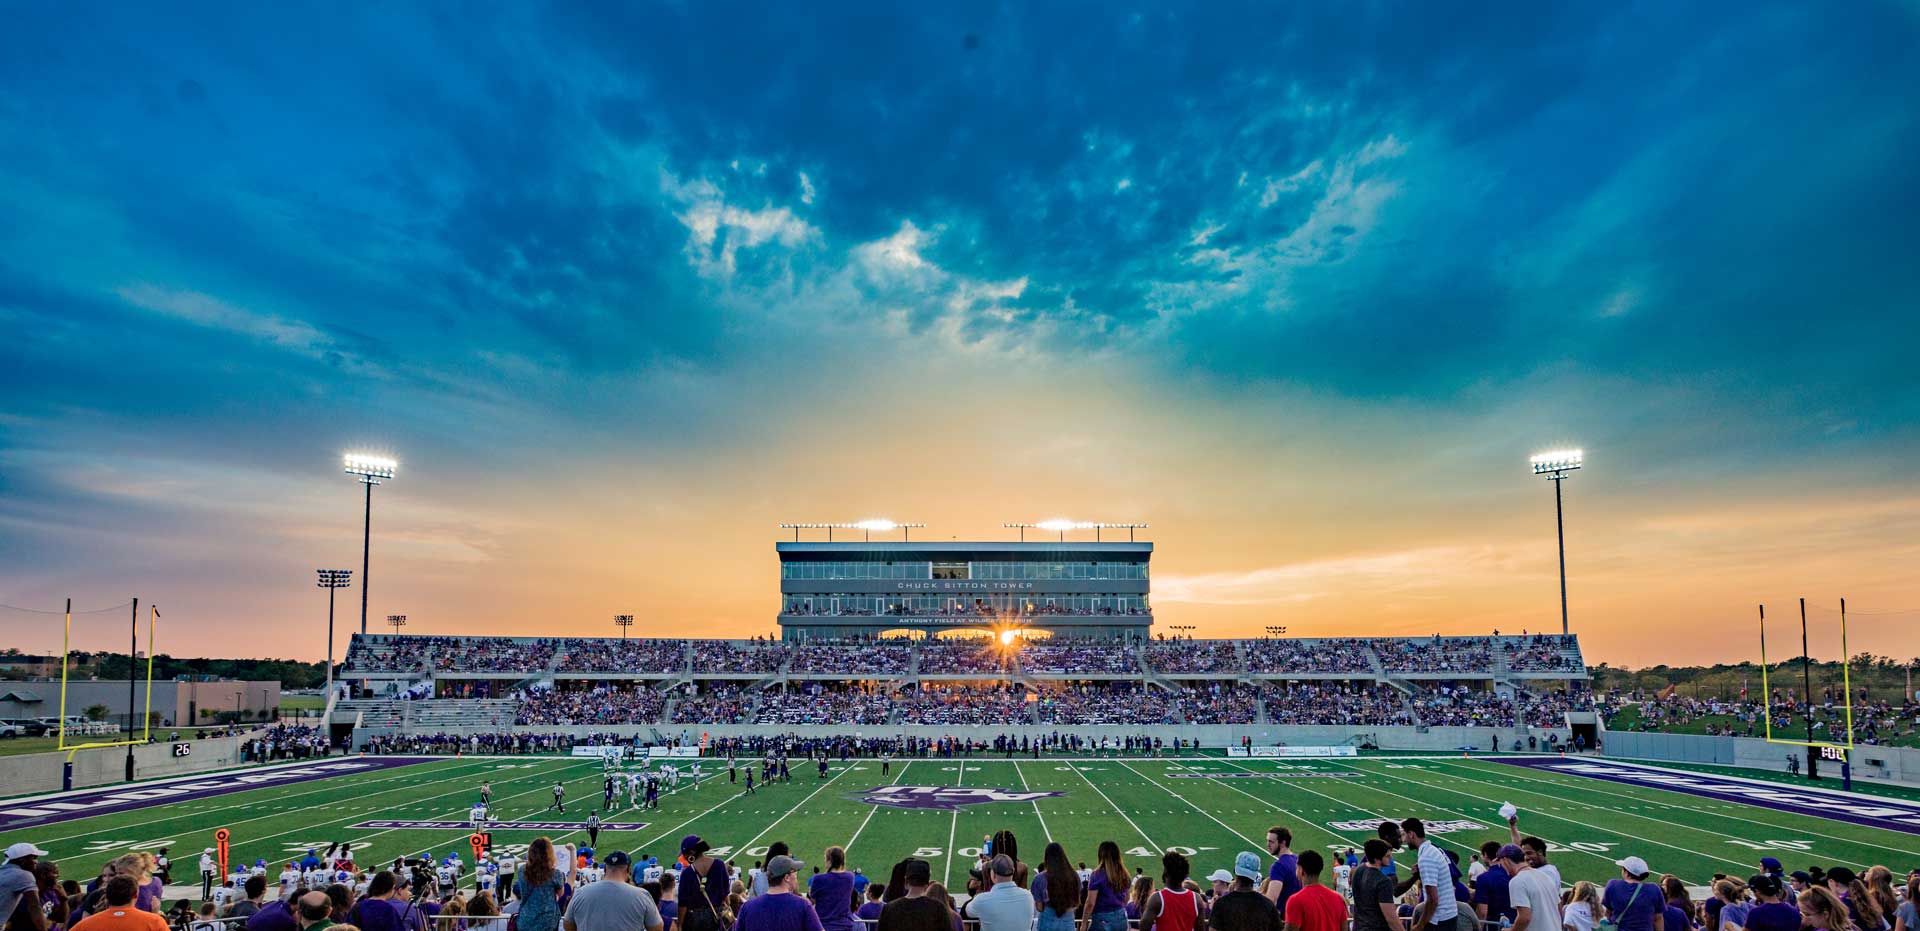 Wildcat Stadium opened with a sell-out crowd, football victory and a stunning sunset.